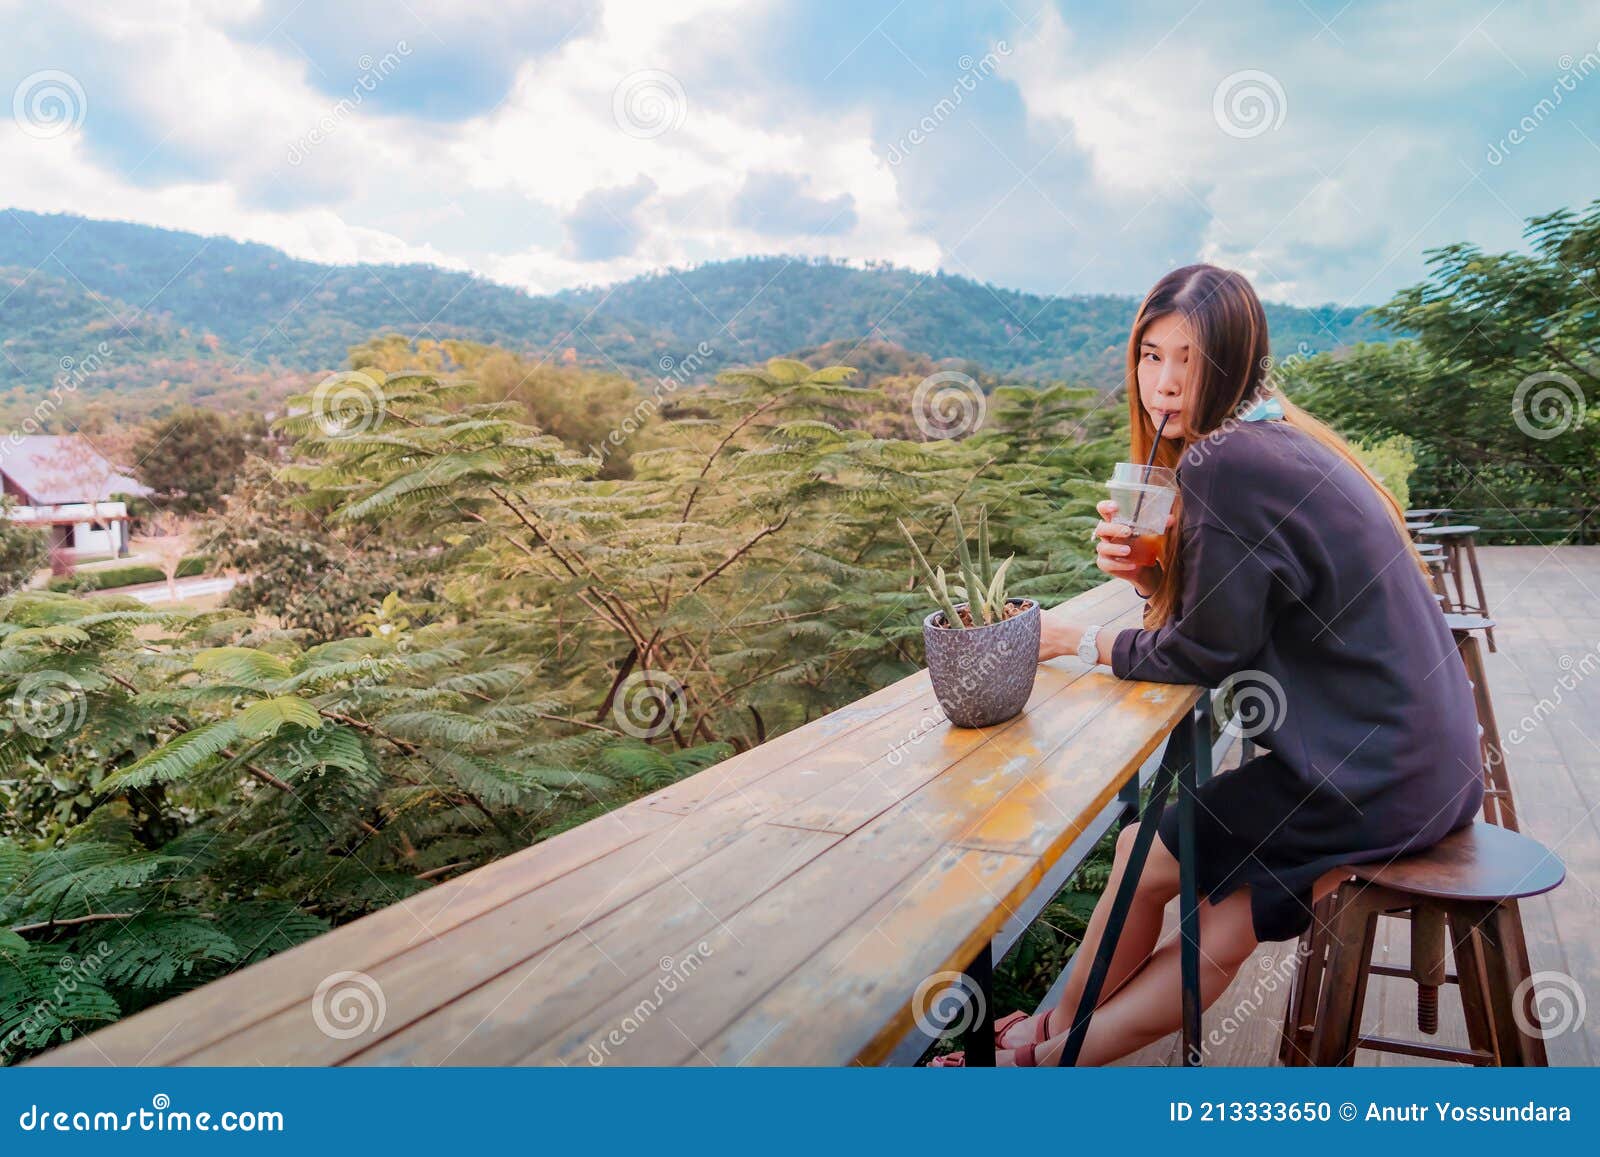 beauty asian smiling female is sitting in cafe with forest and mountain nature background while drinking iced americano